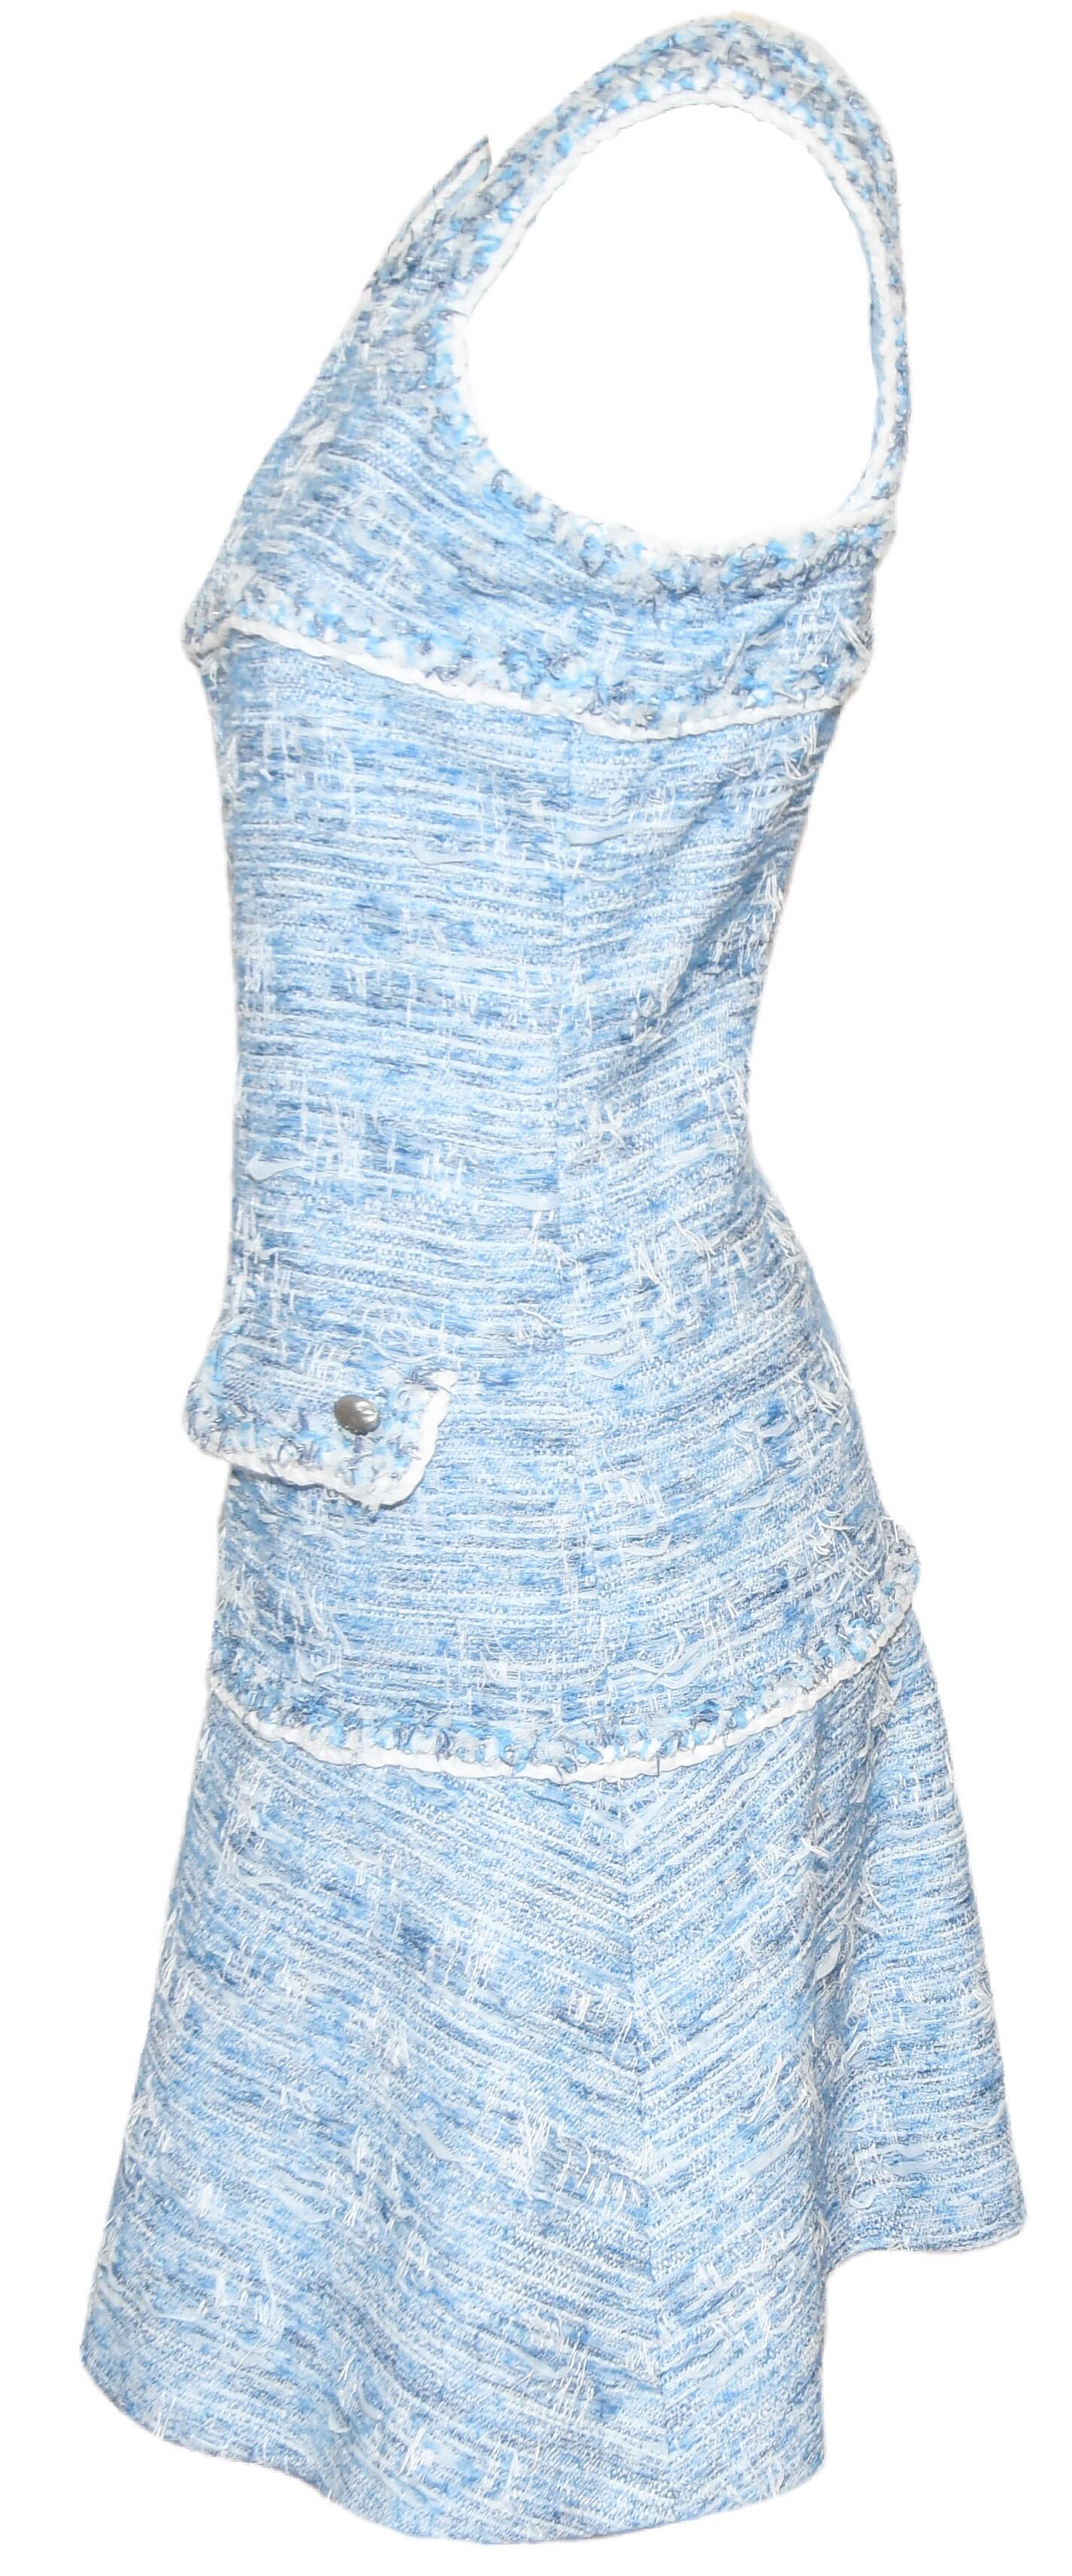 Chanel light blue fantasy tweed dress incorporates a scoop neckline and wide straps that are attached at back.   The original straps criss crossed at back and there is not damage to the straps.  This dress contains a braided trim of white piping,